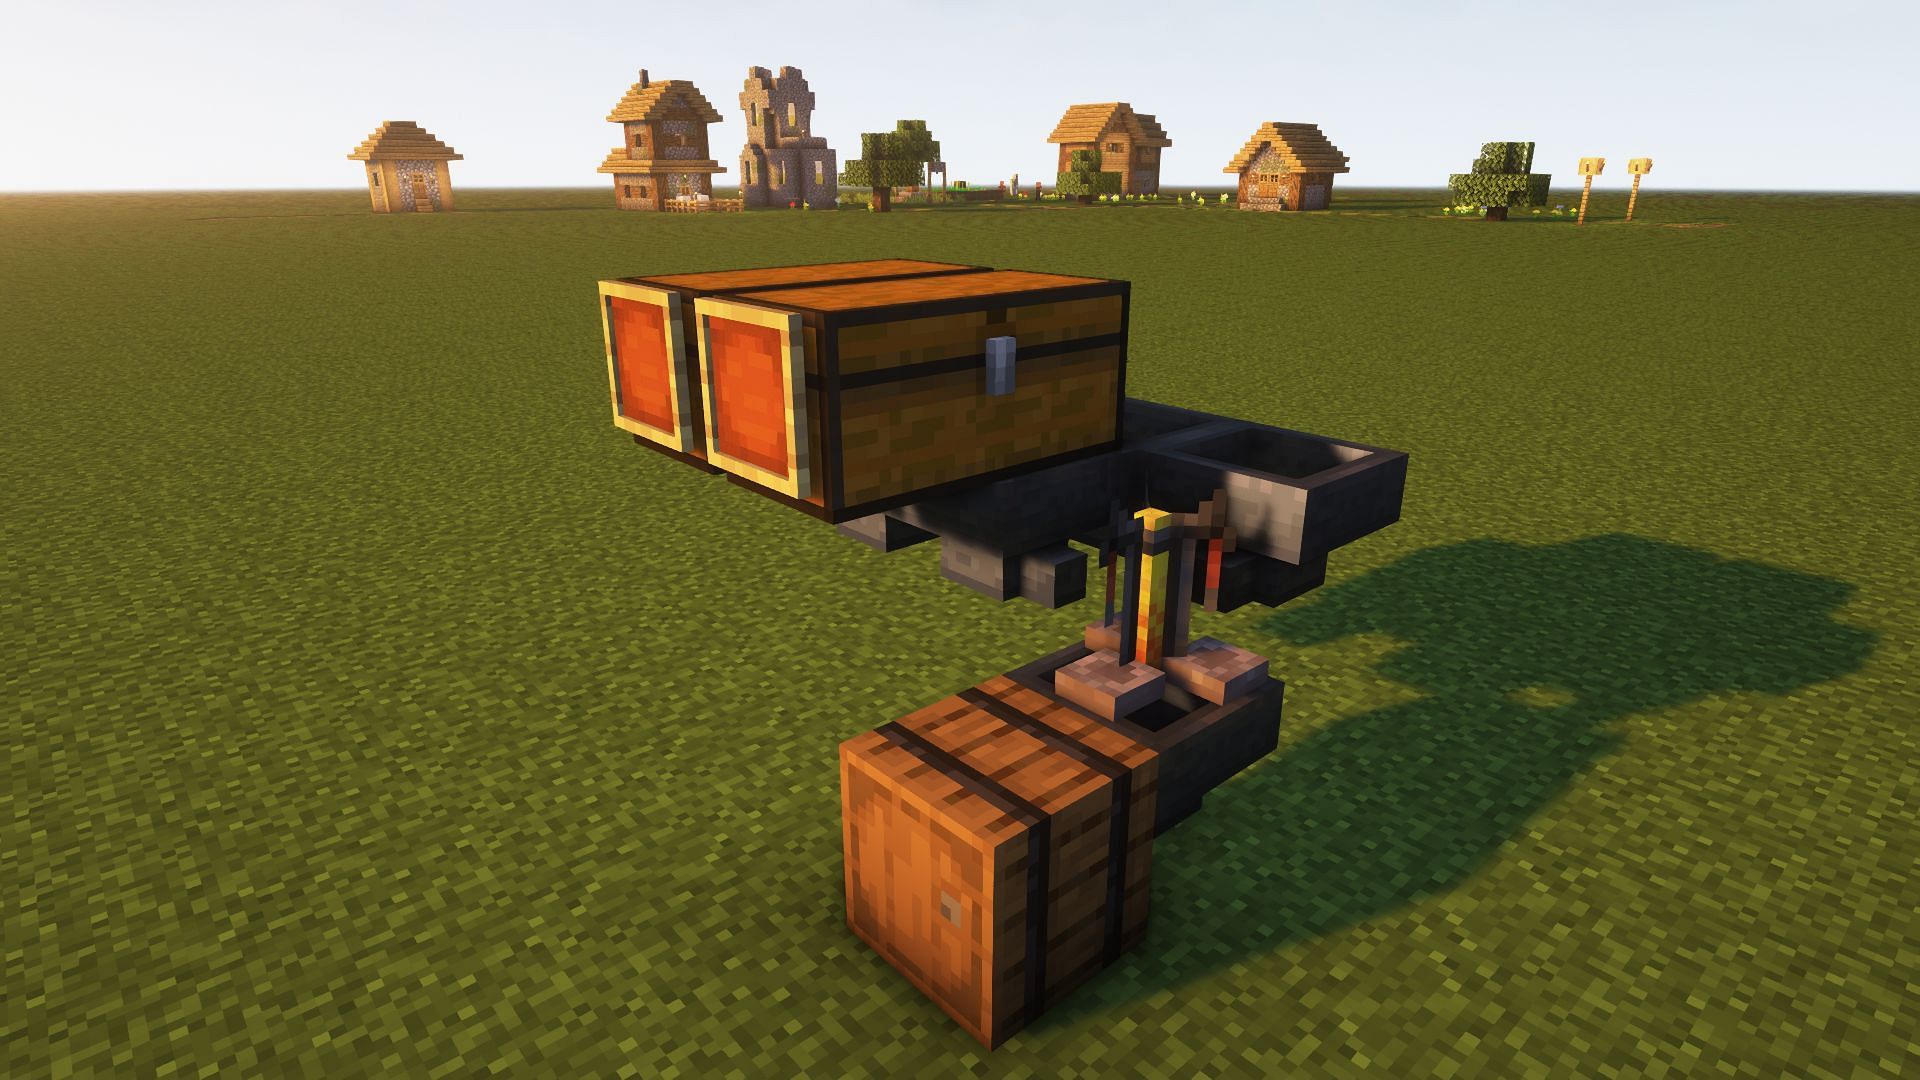 Step 3 of making the redstone contraption in Minecraft (Image via Mojang)